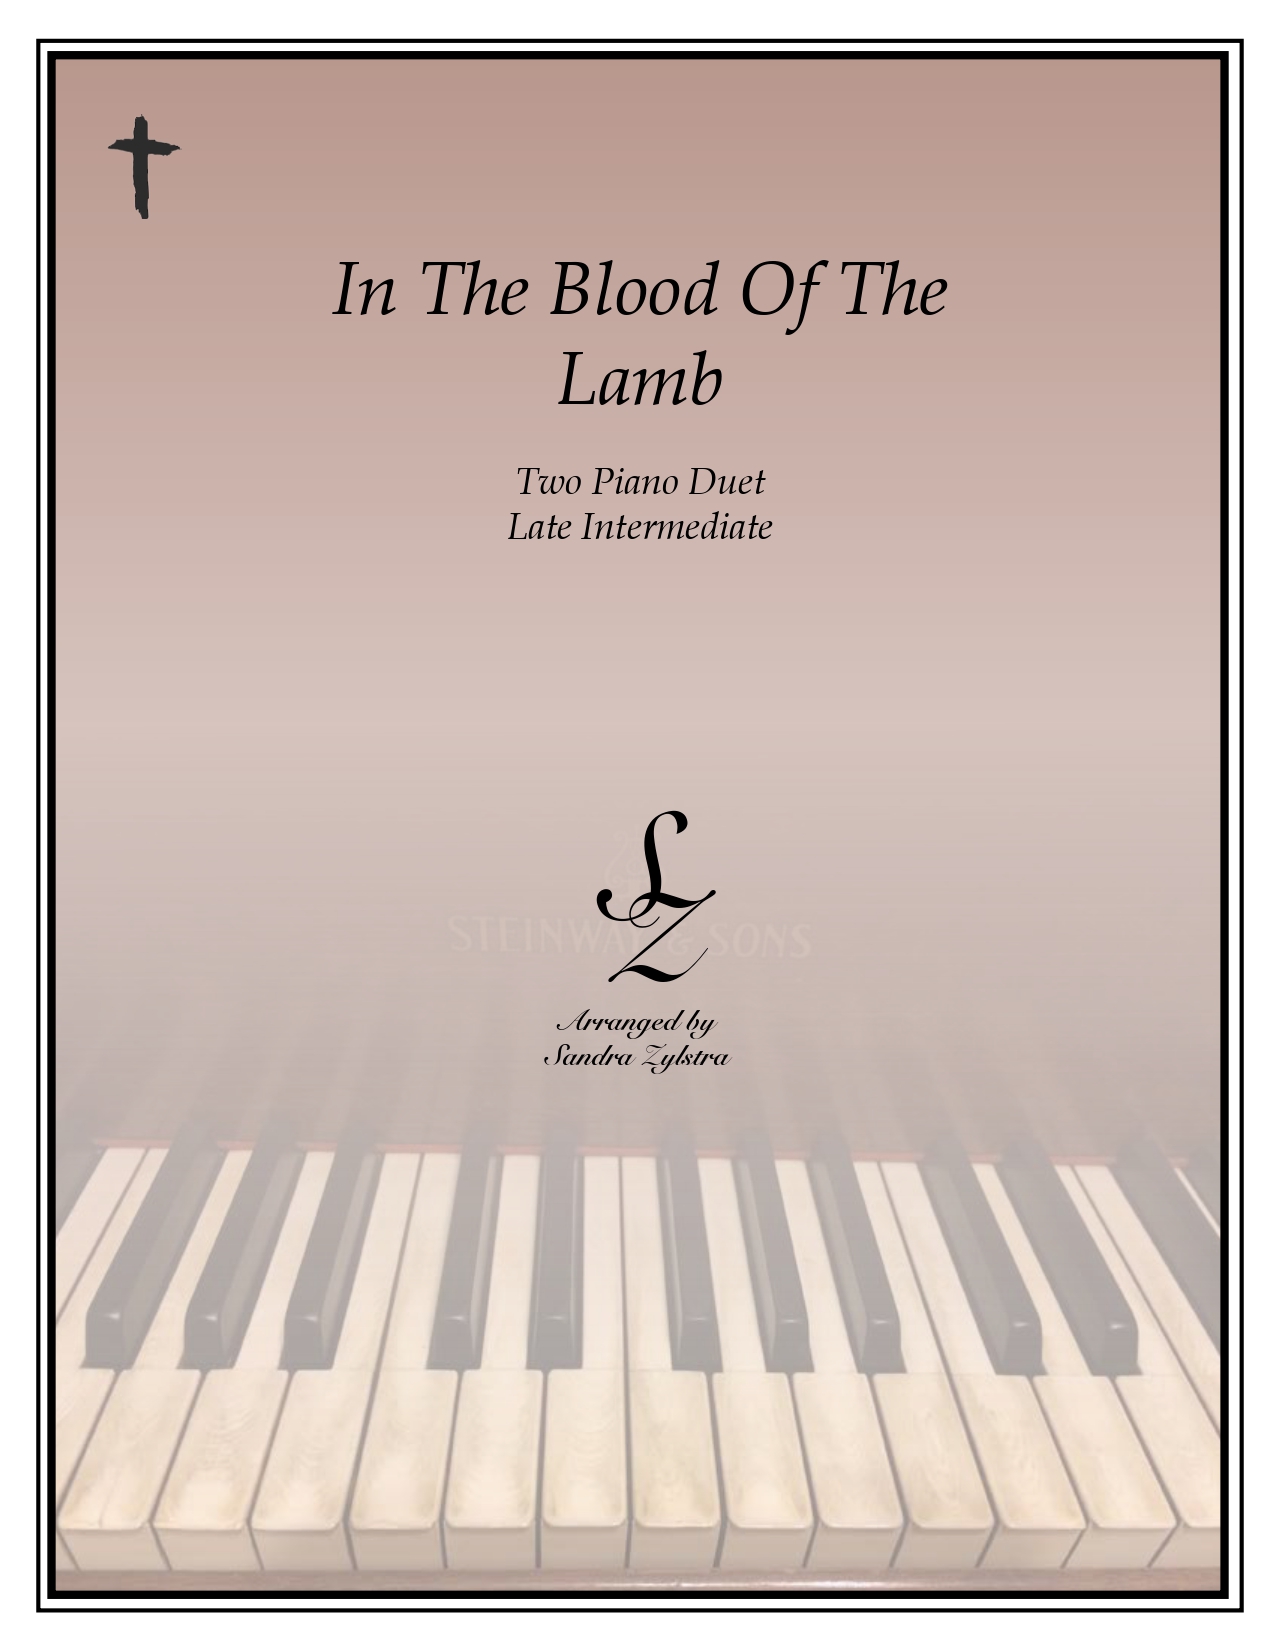 In The Blood Of The Lamb Duet cover page 00011